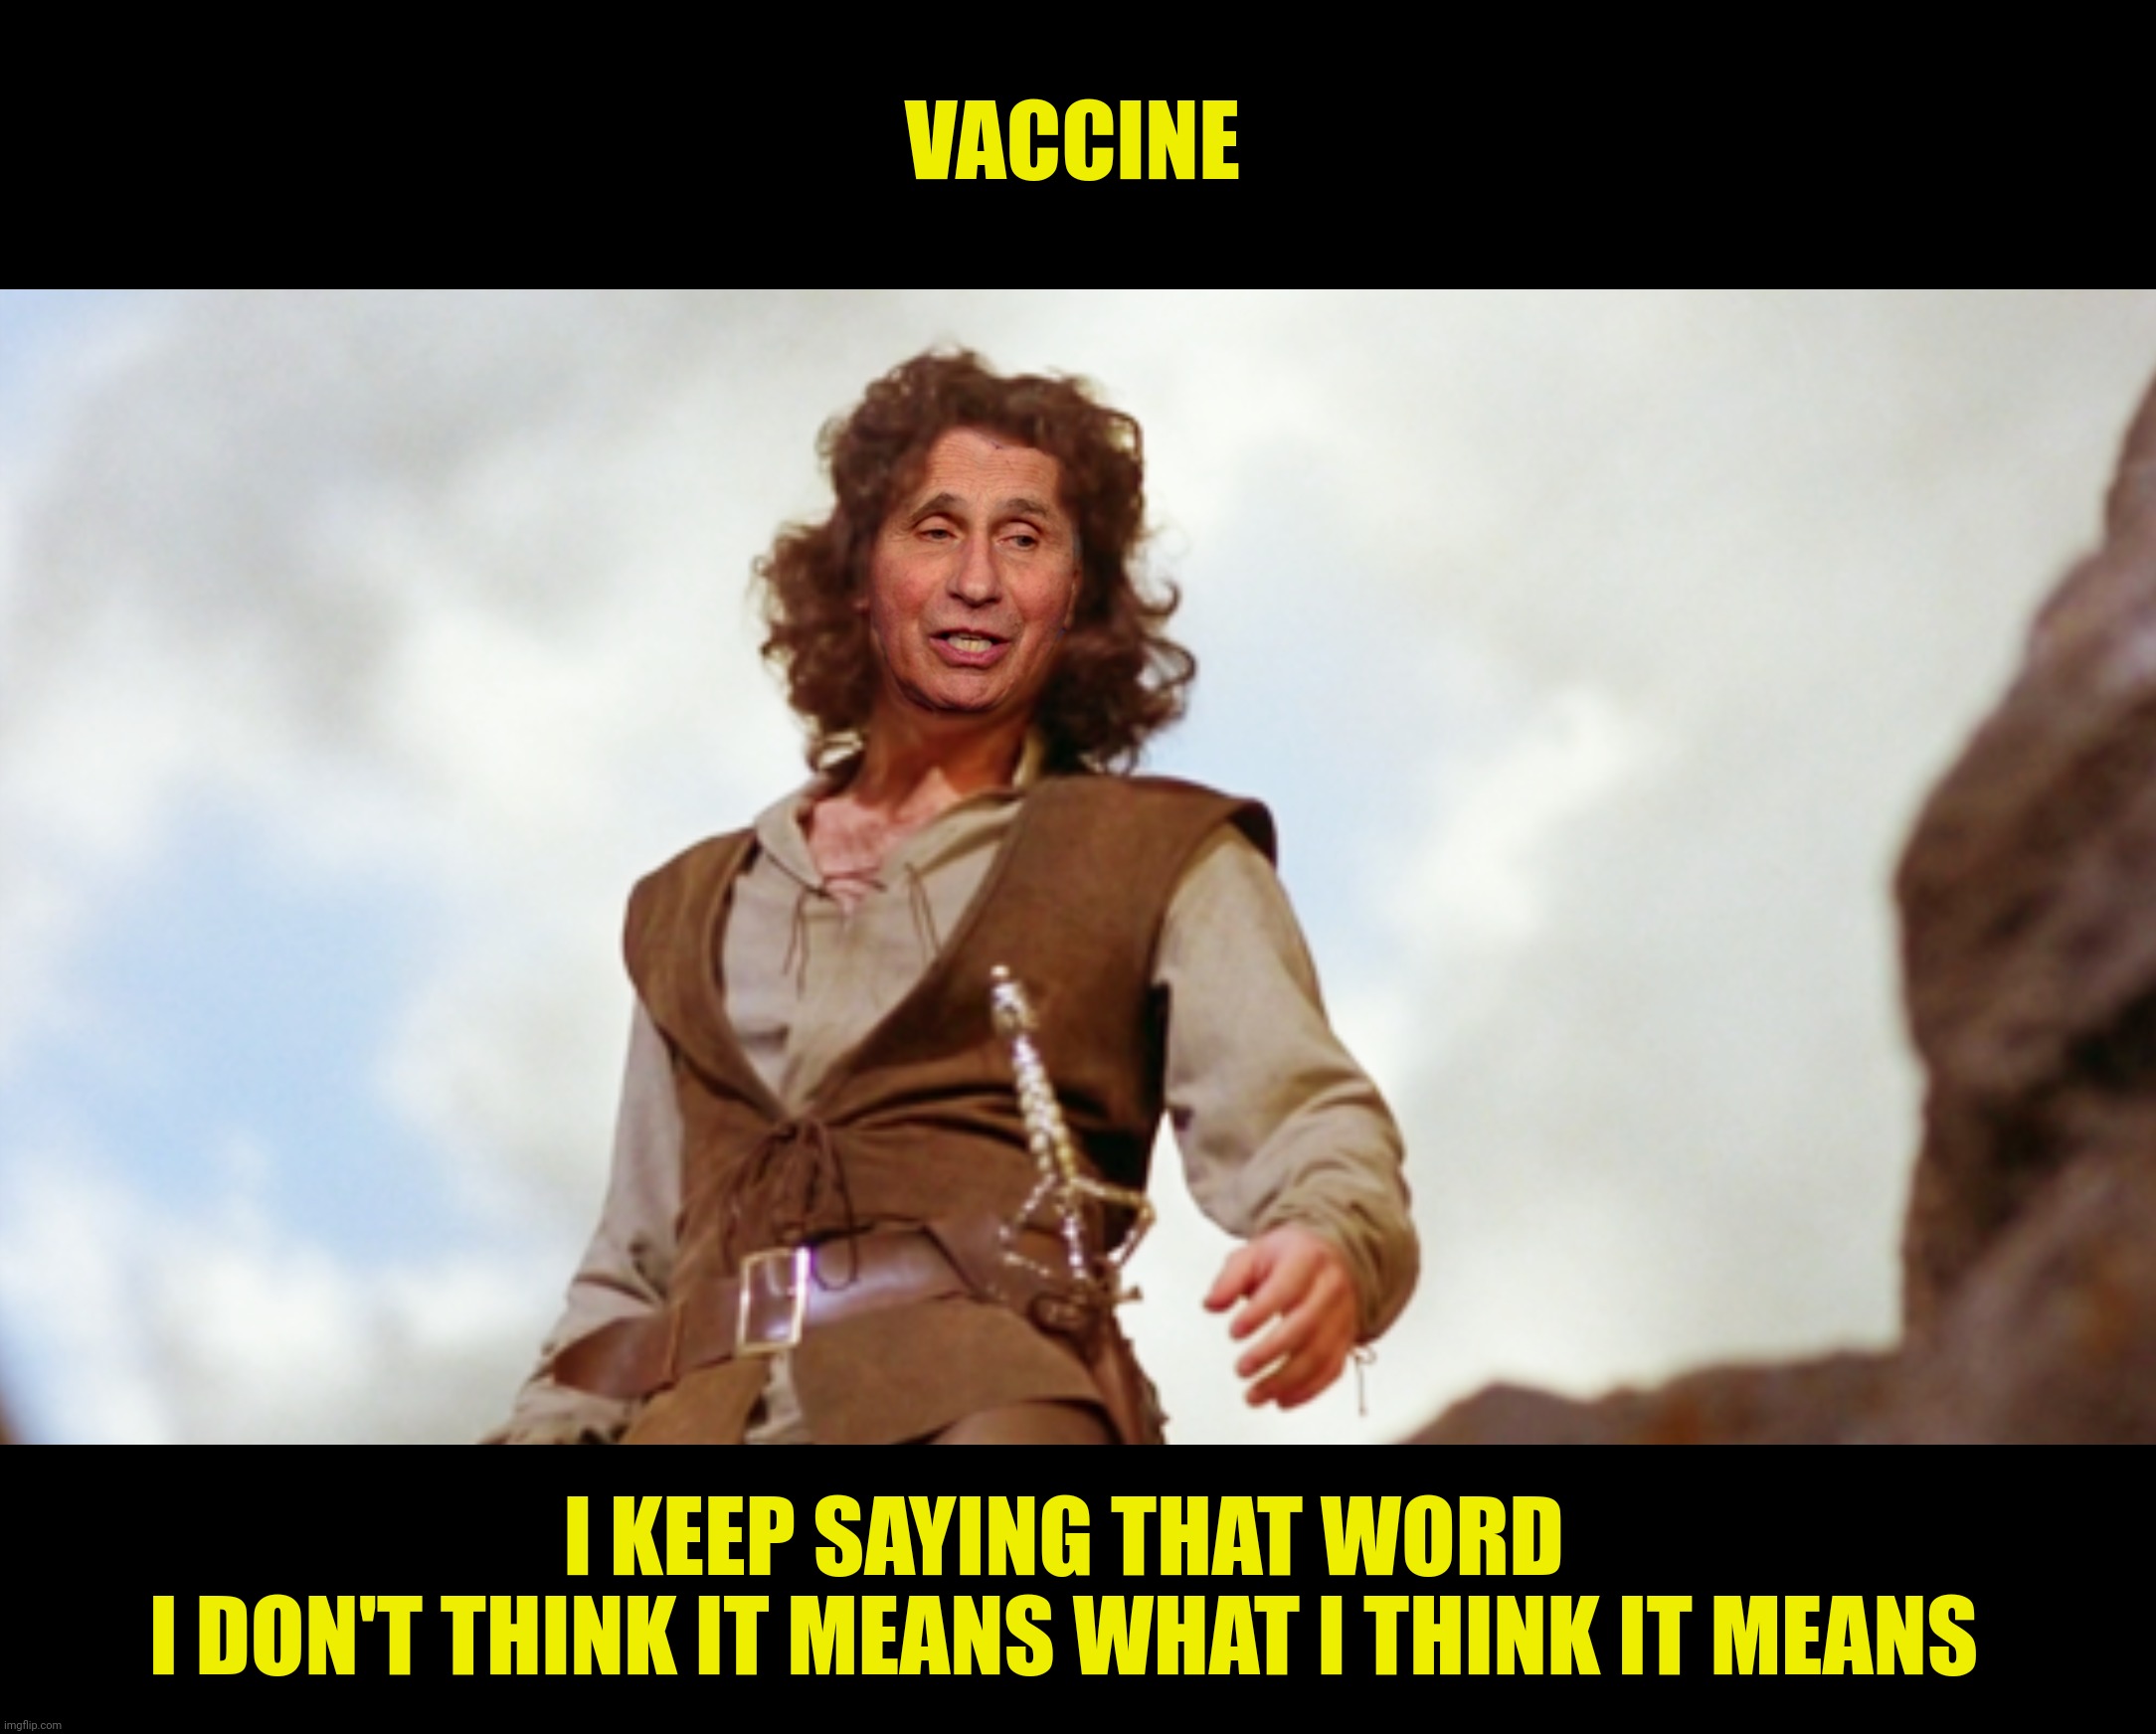 VACCINE I KEEP SAYING THAT WORD 
I DON'T THINK IT MEANS WHAT I THINK IT MEANS | made w/ Imgflip meme maker